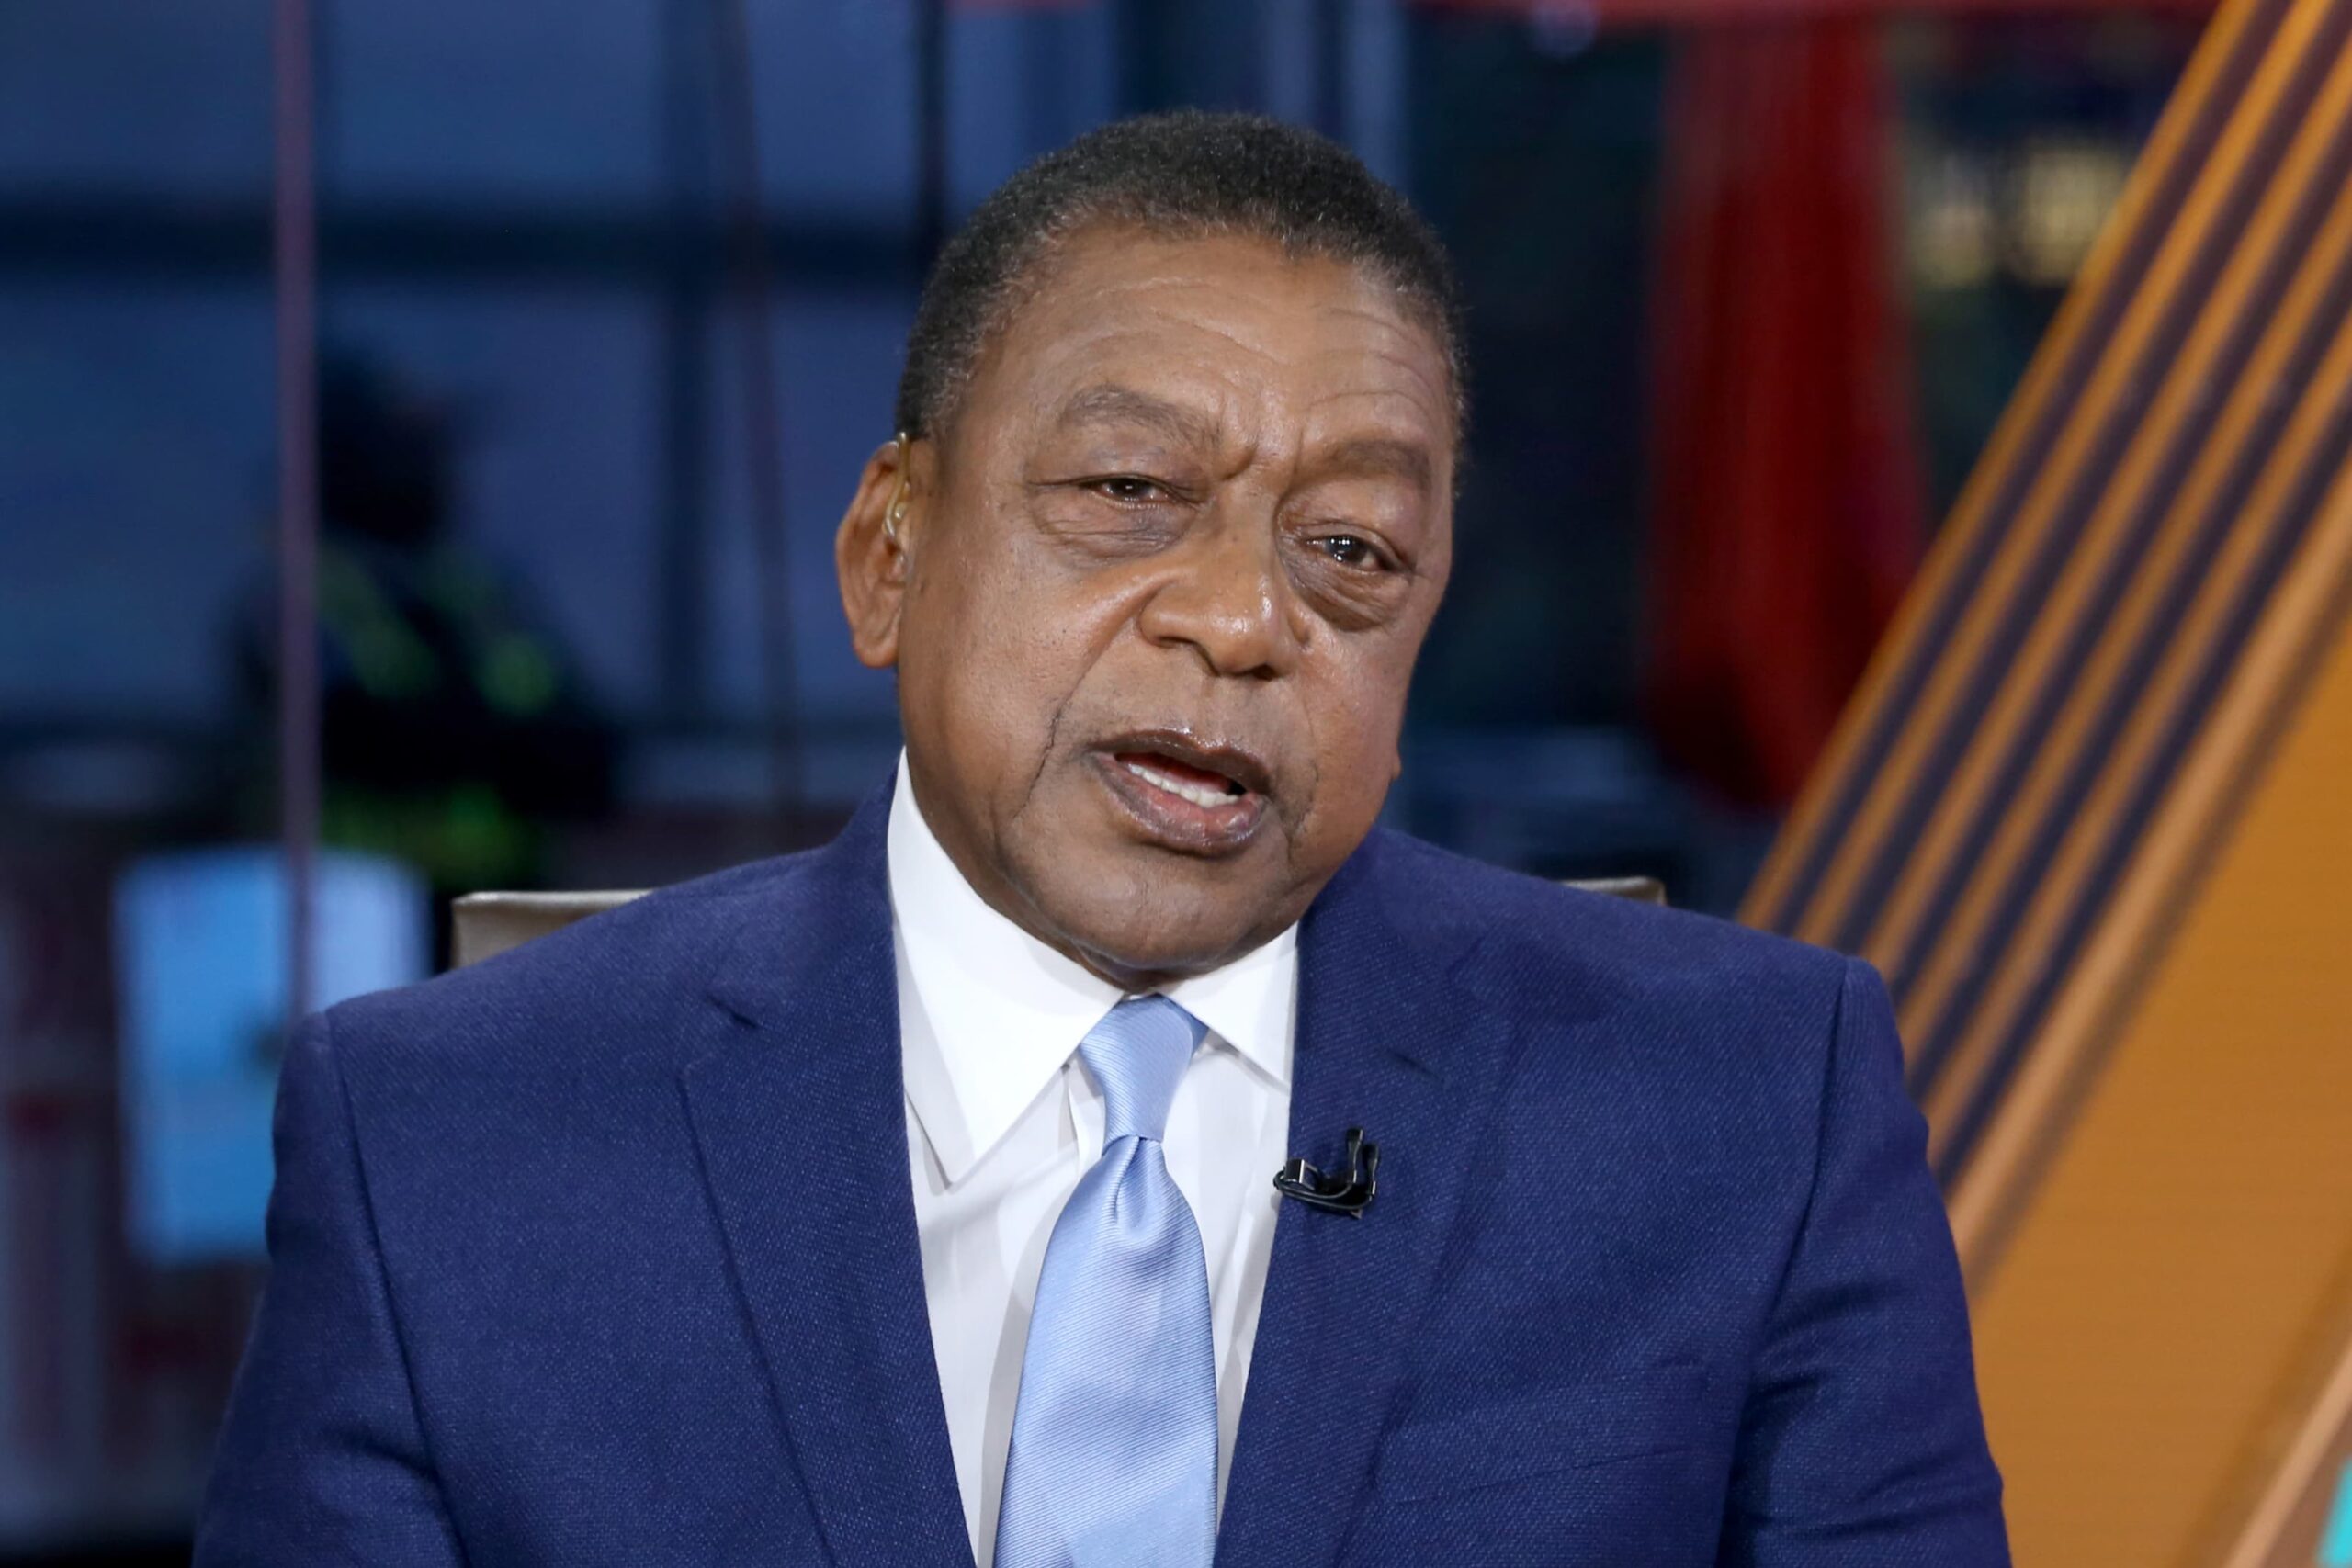 BET founder Robert Johnson on entry to capital for Black Individuals